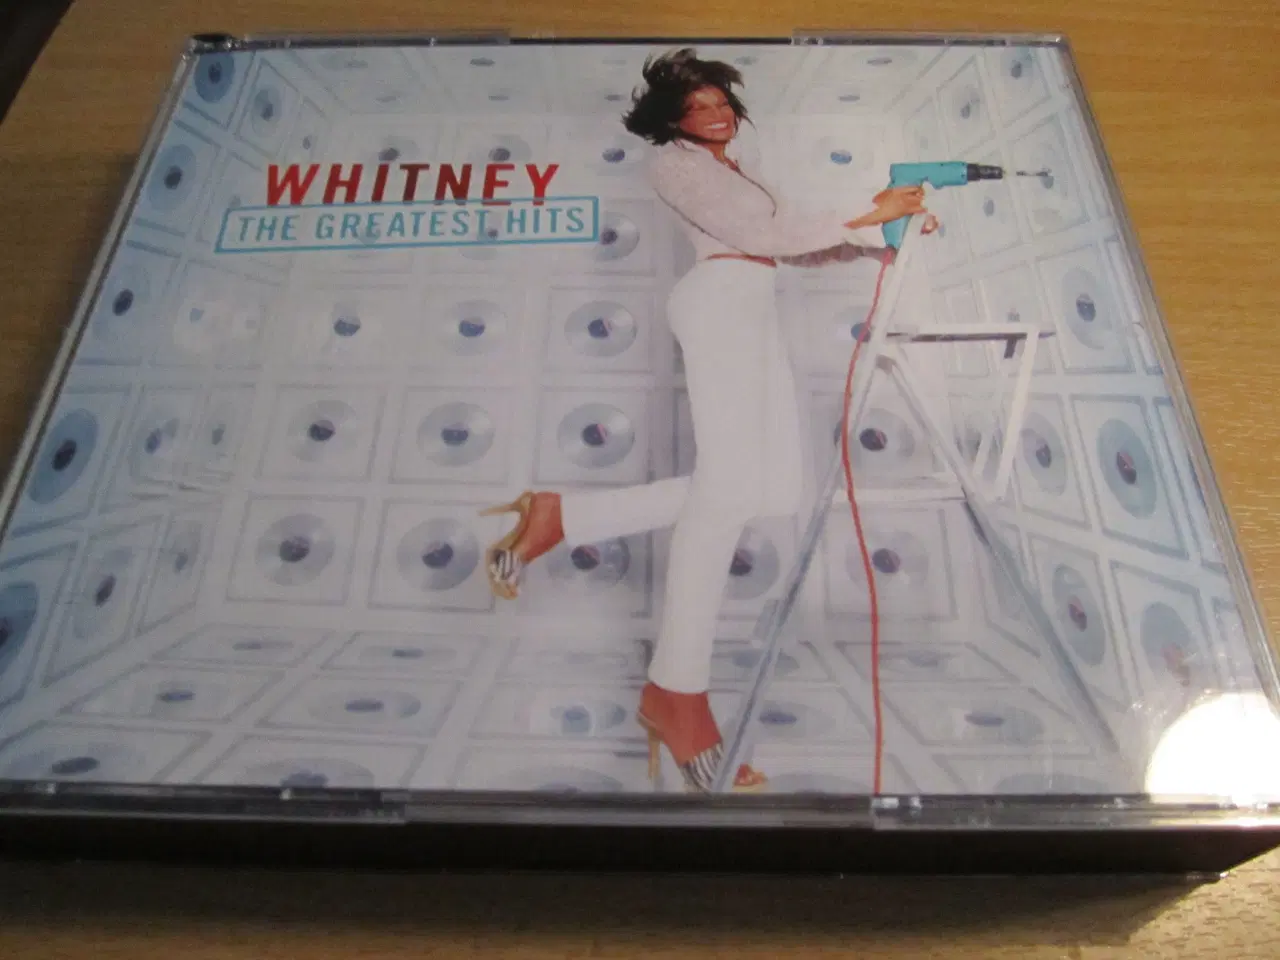 Billede 1 - WHITNEY. The Greatest Hits.